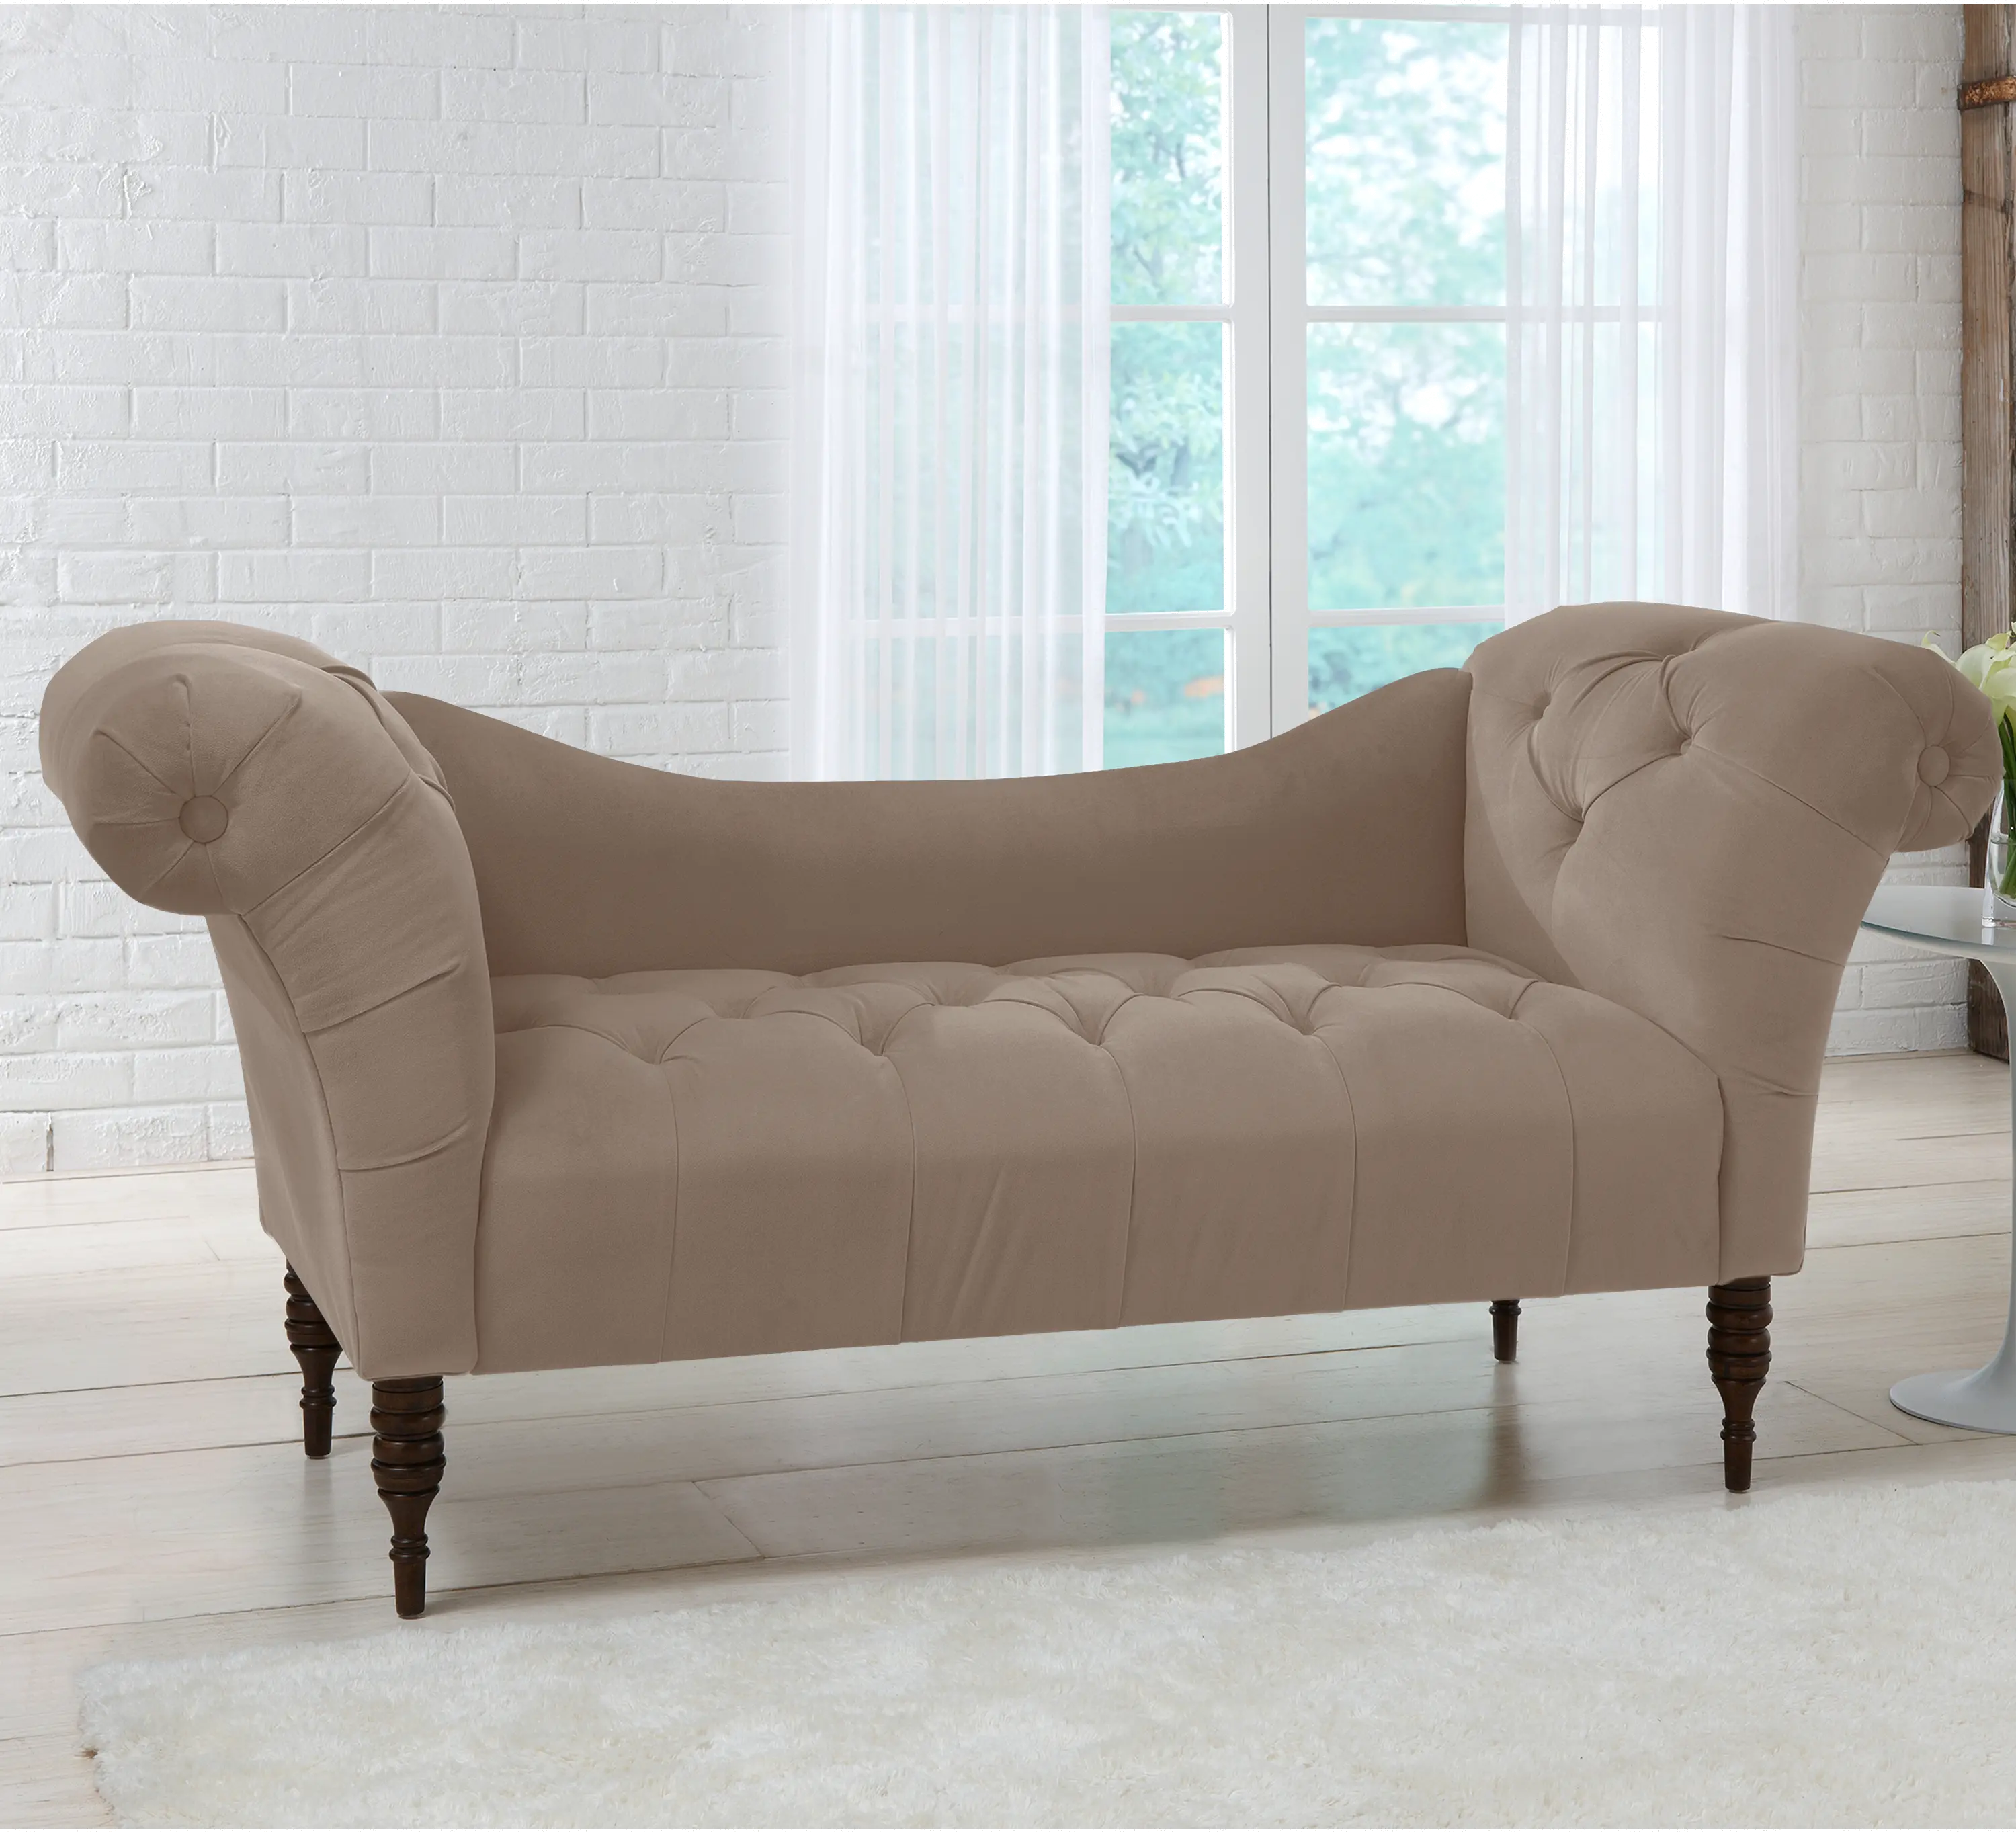 Edith Cocoa Brown Velvet Tufted Lounge Chaise - Skyline Furniture